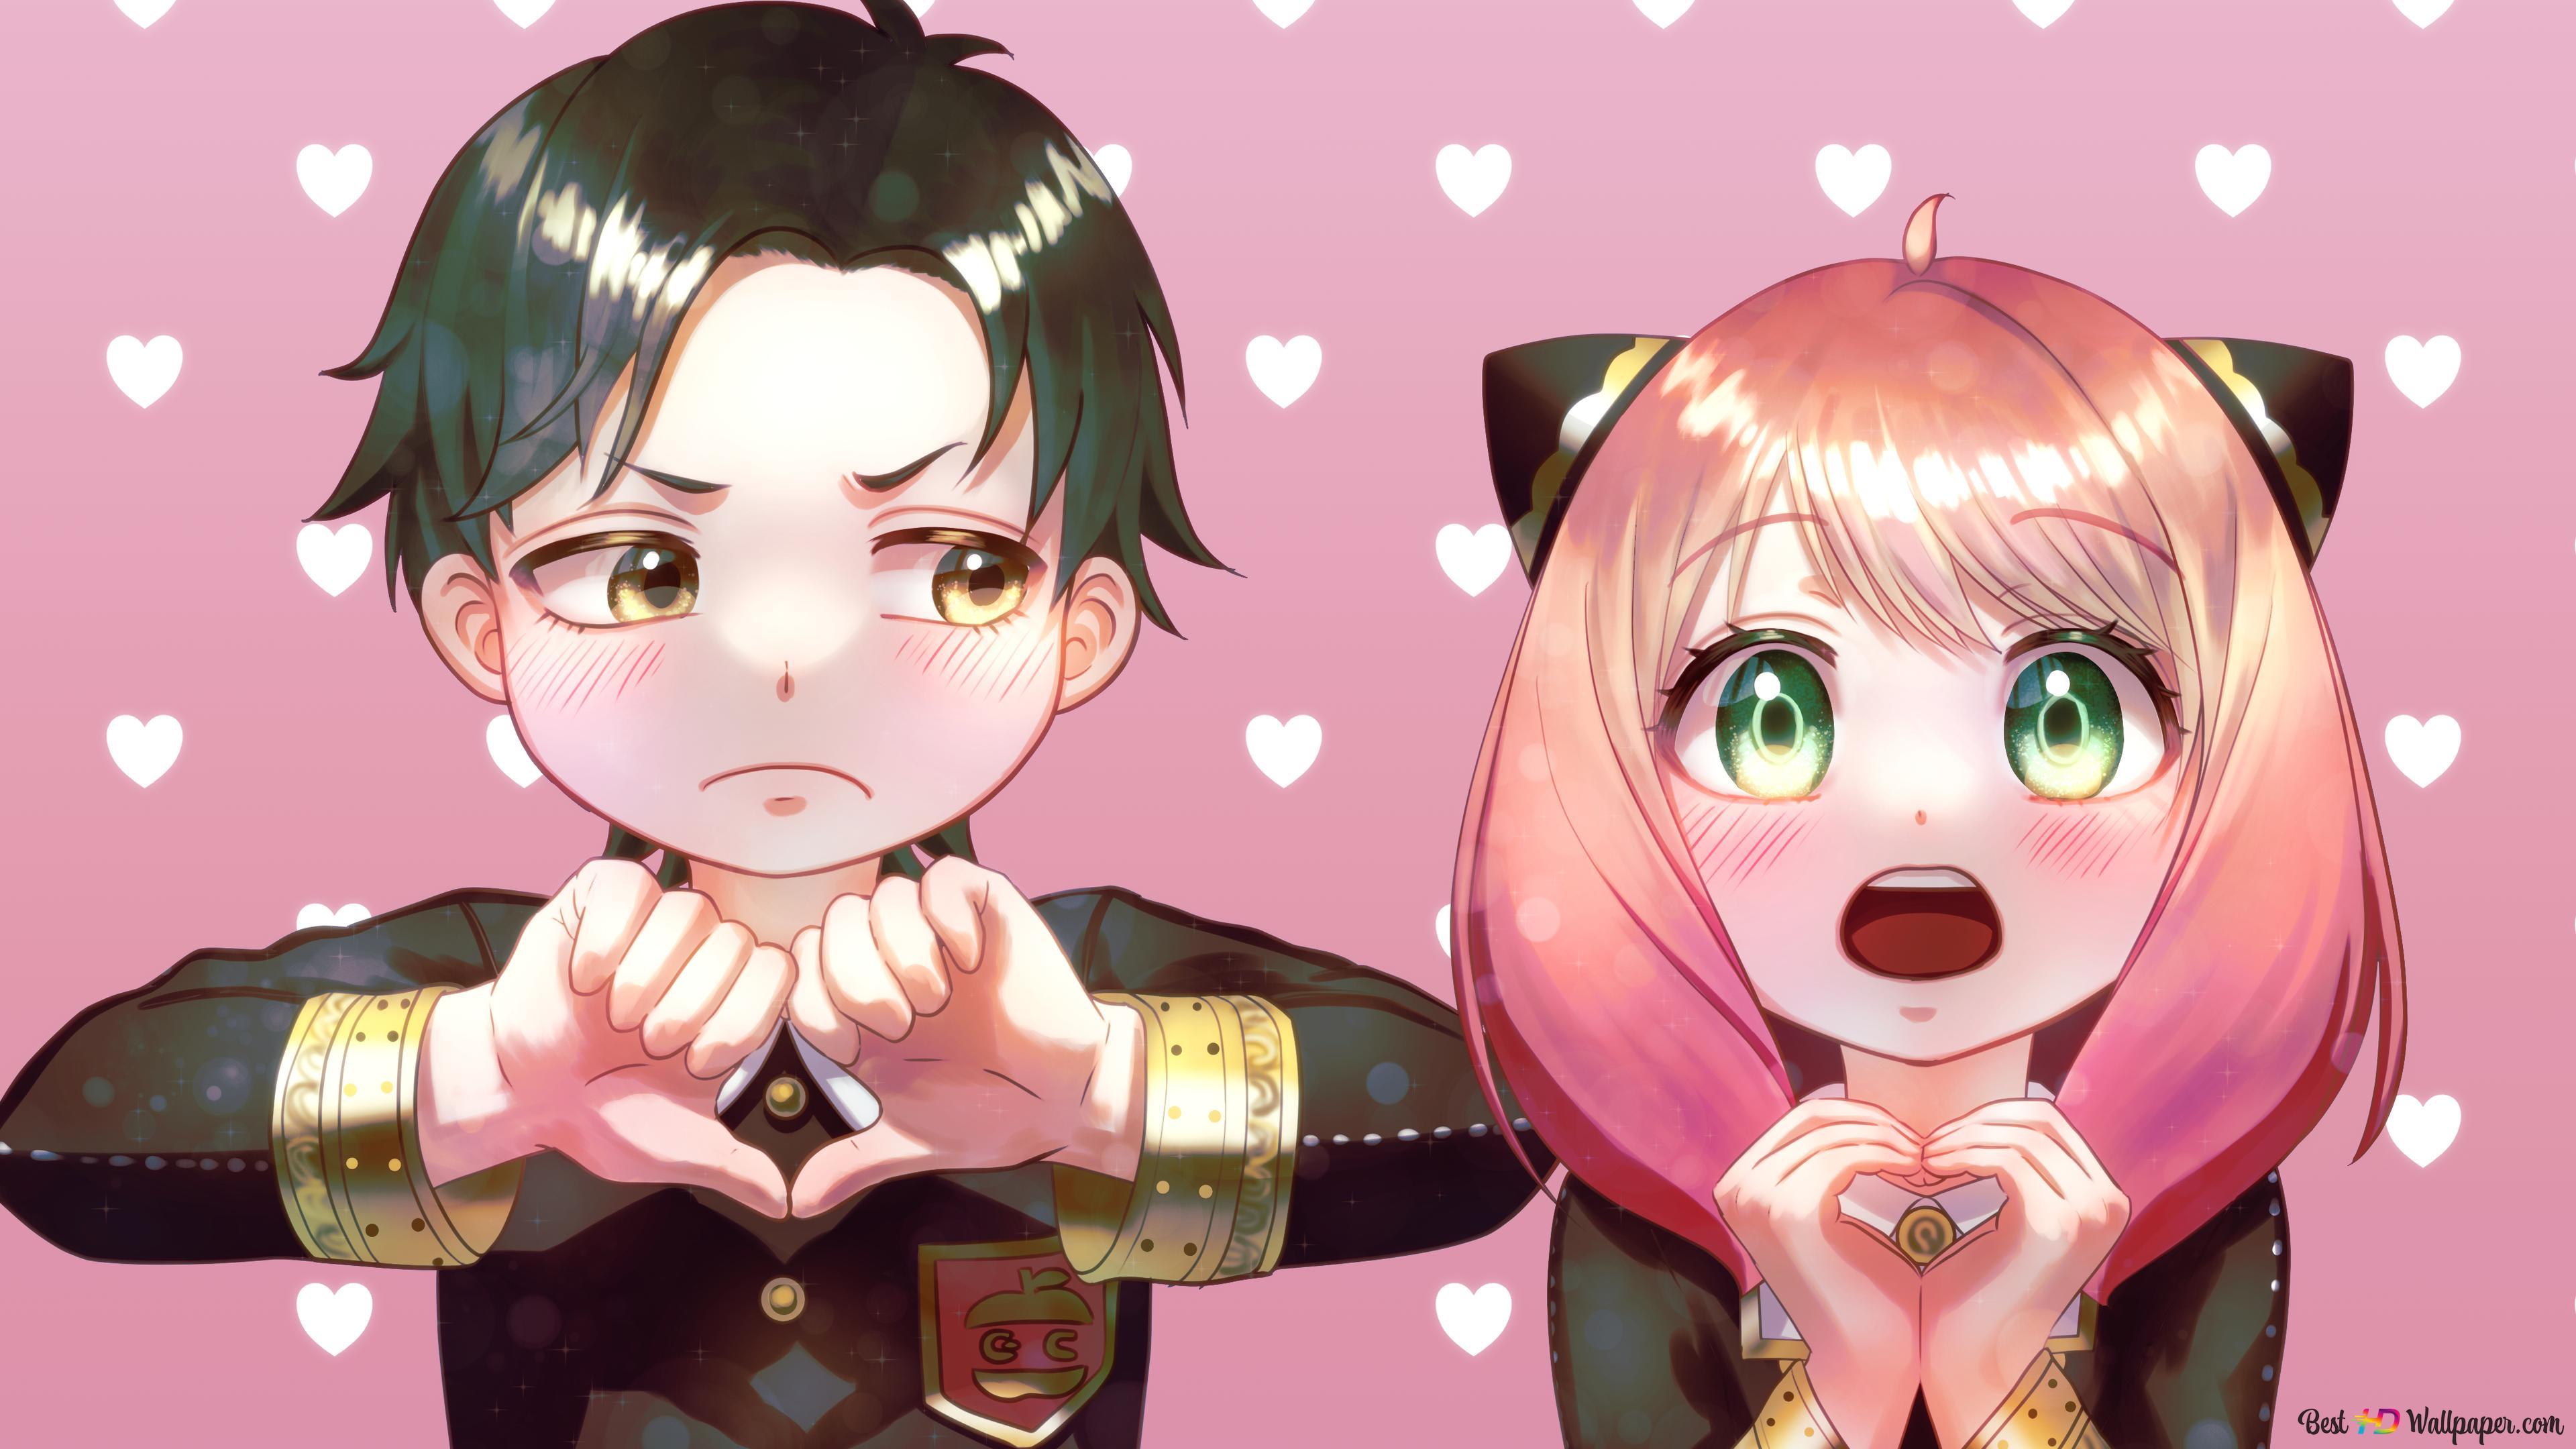 Spy x Family and Damian doing heart sign 4K wallpaper download